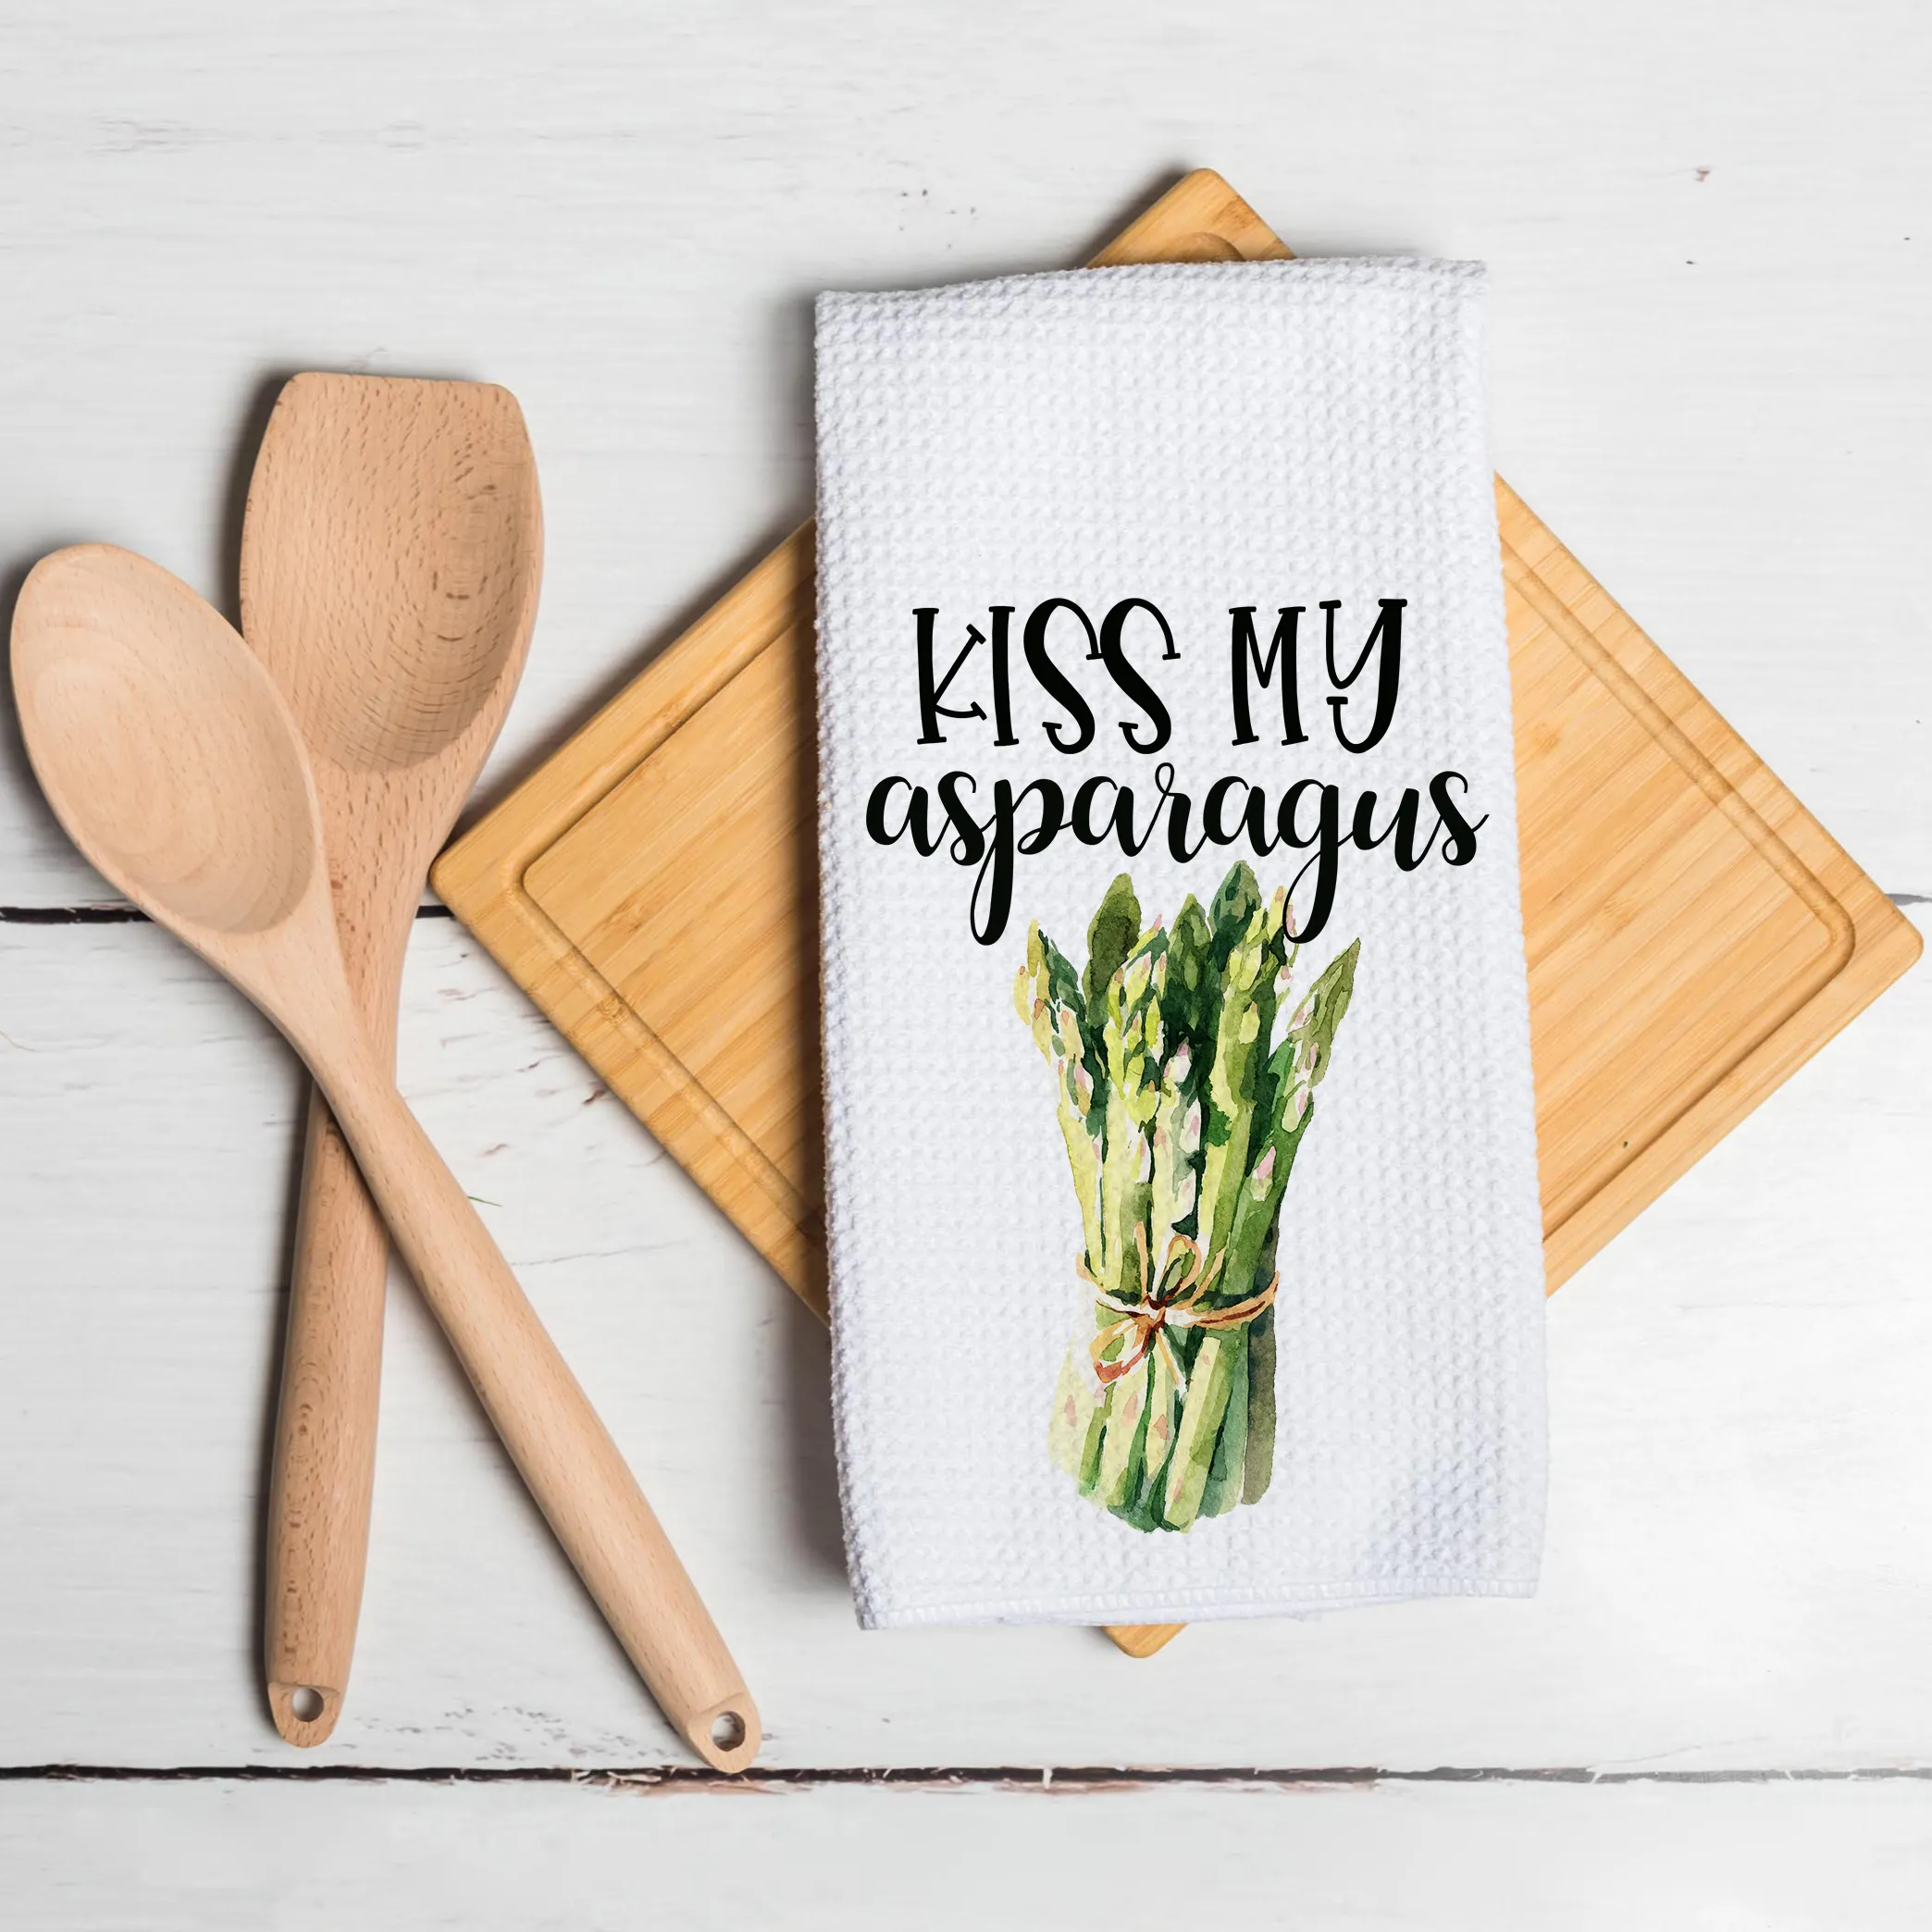 I Don't Carrot All Let The Beet Drop Funny Vegetable Saying Waffle Kitchen Tea Towel Hostess Gift